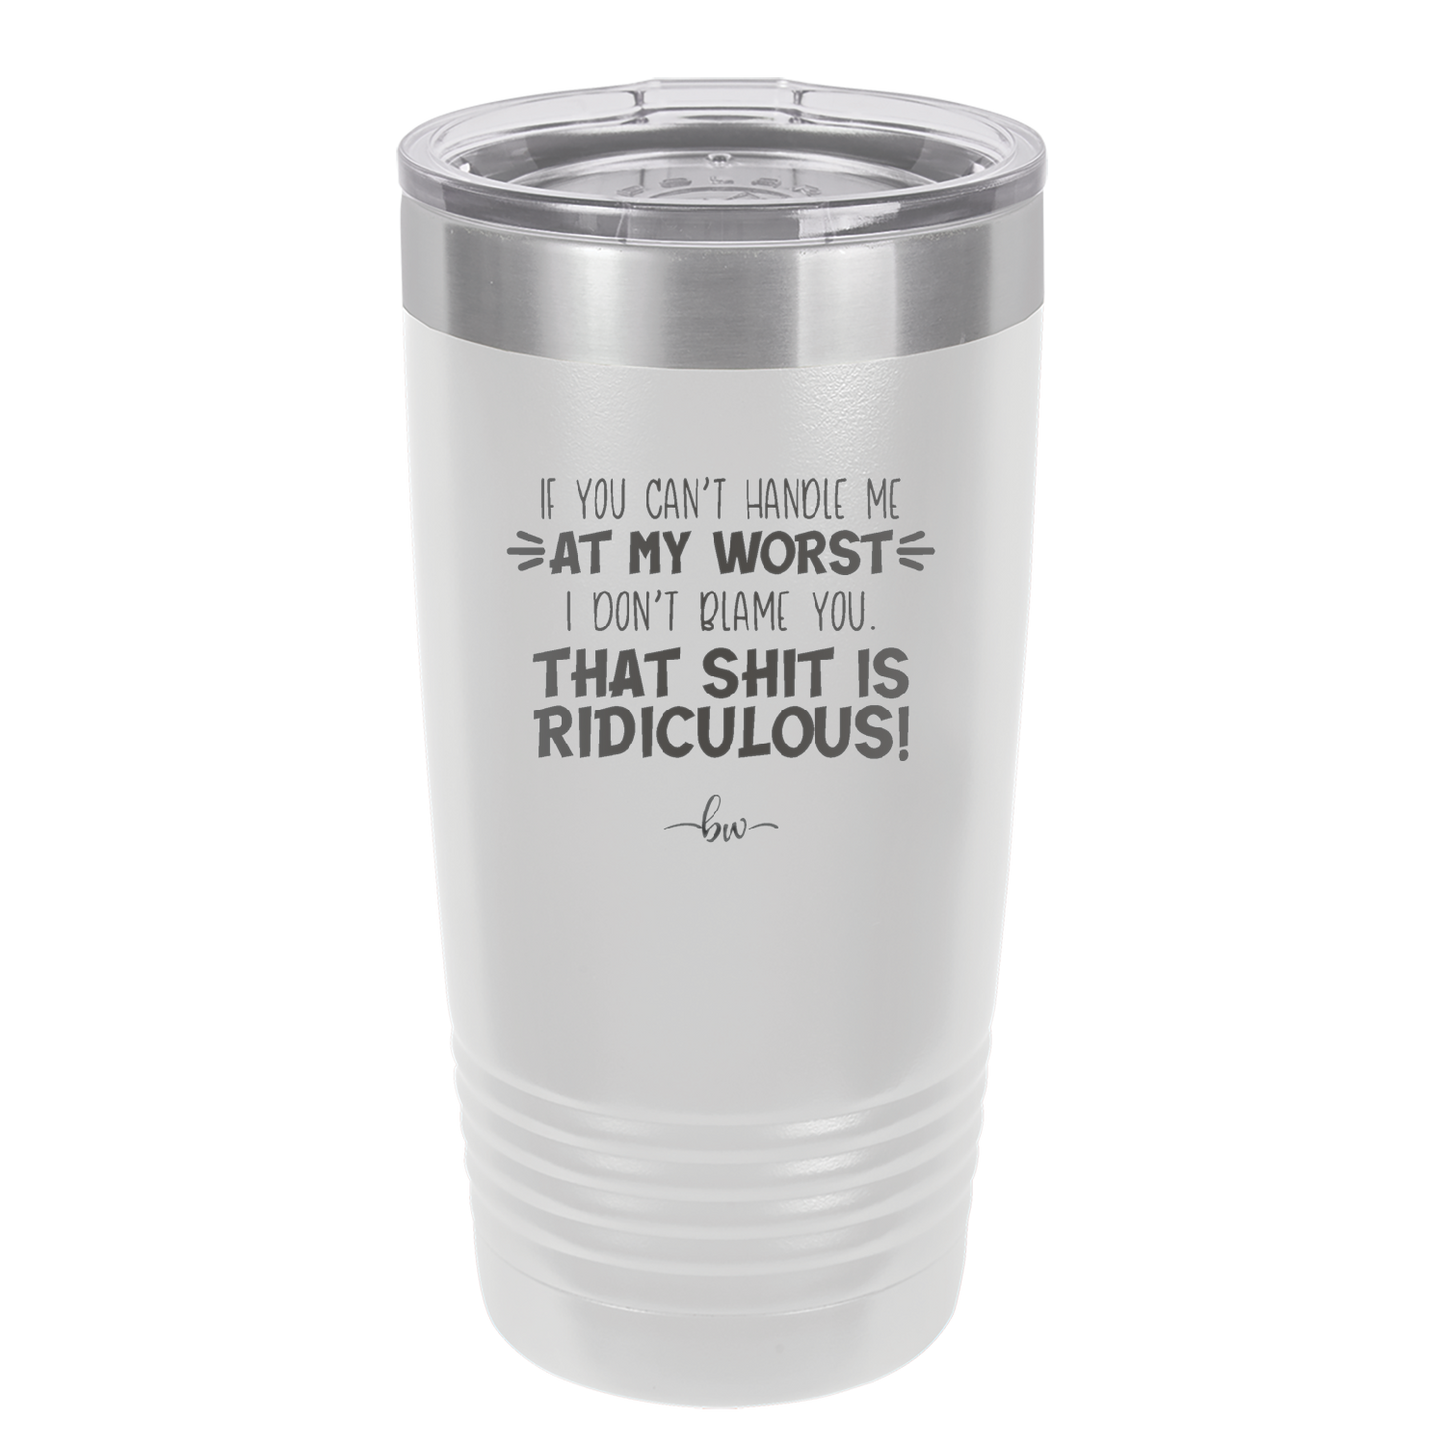 If You Can't Handle Me at My Worst I Don't Blame You - Laser Engraved Stainless Steel Drinkware - 1364 -